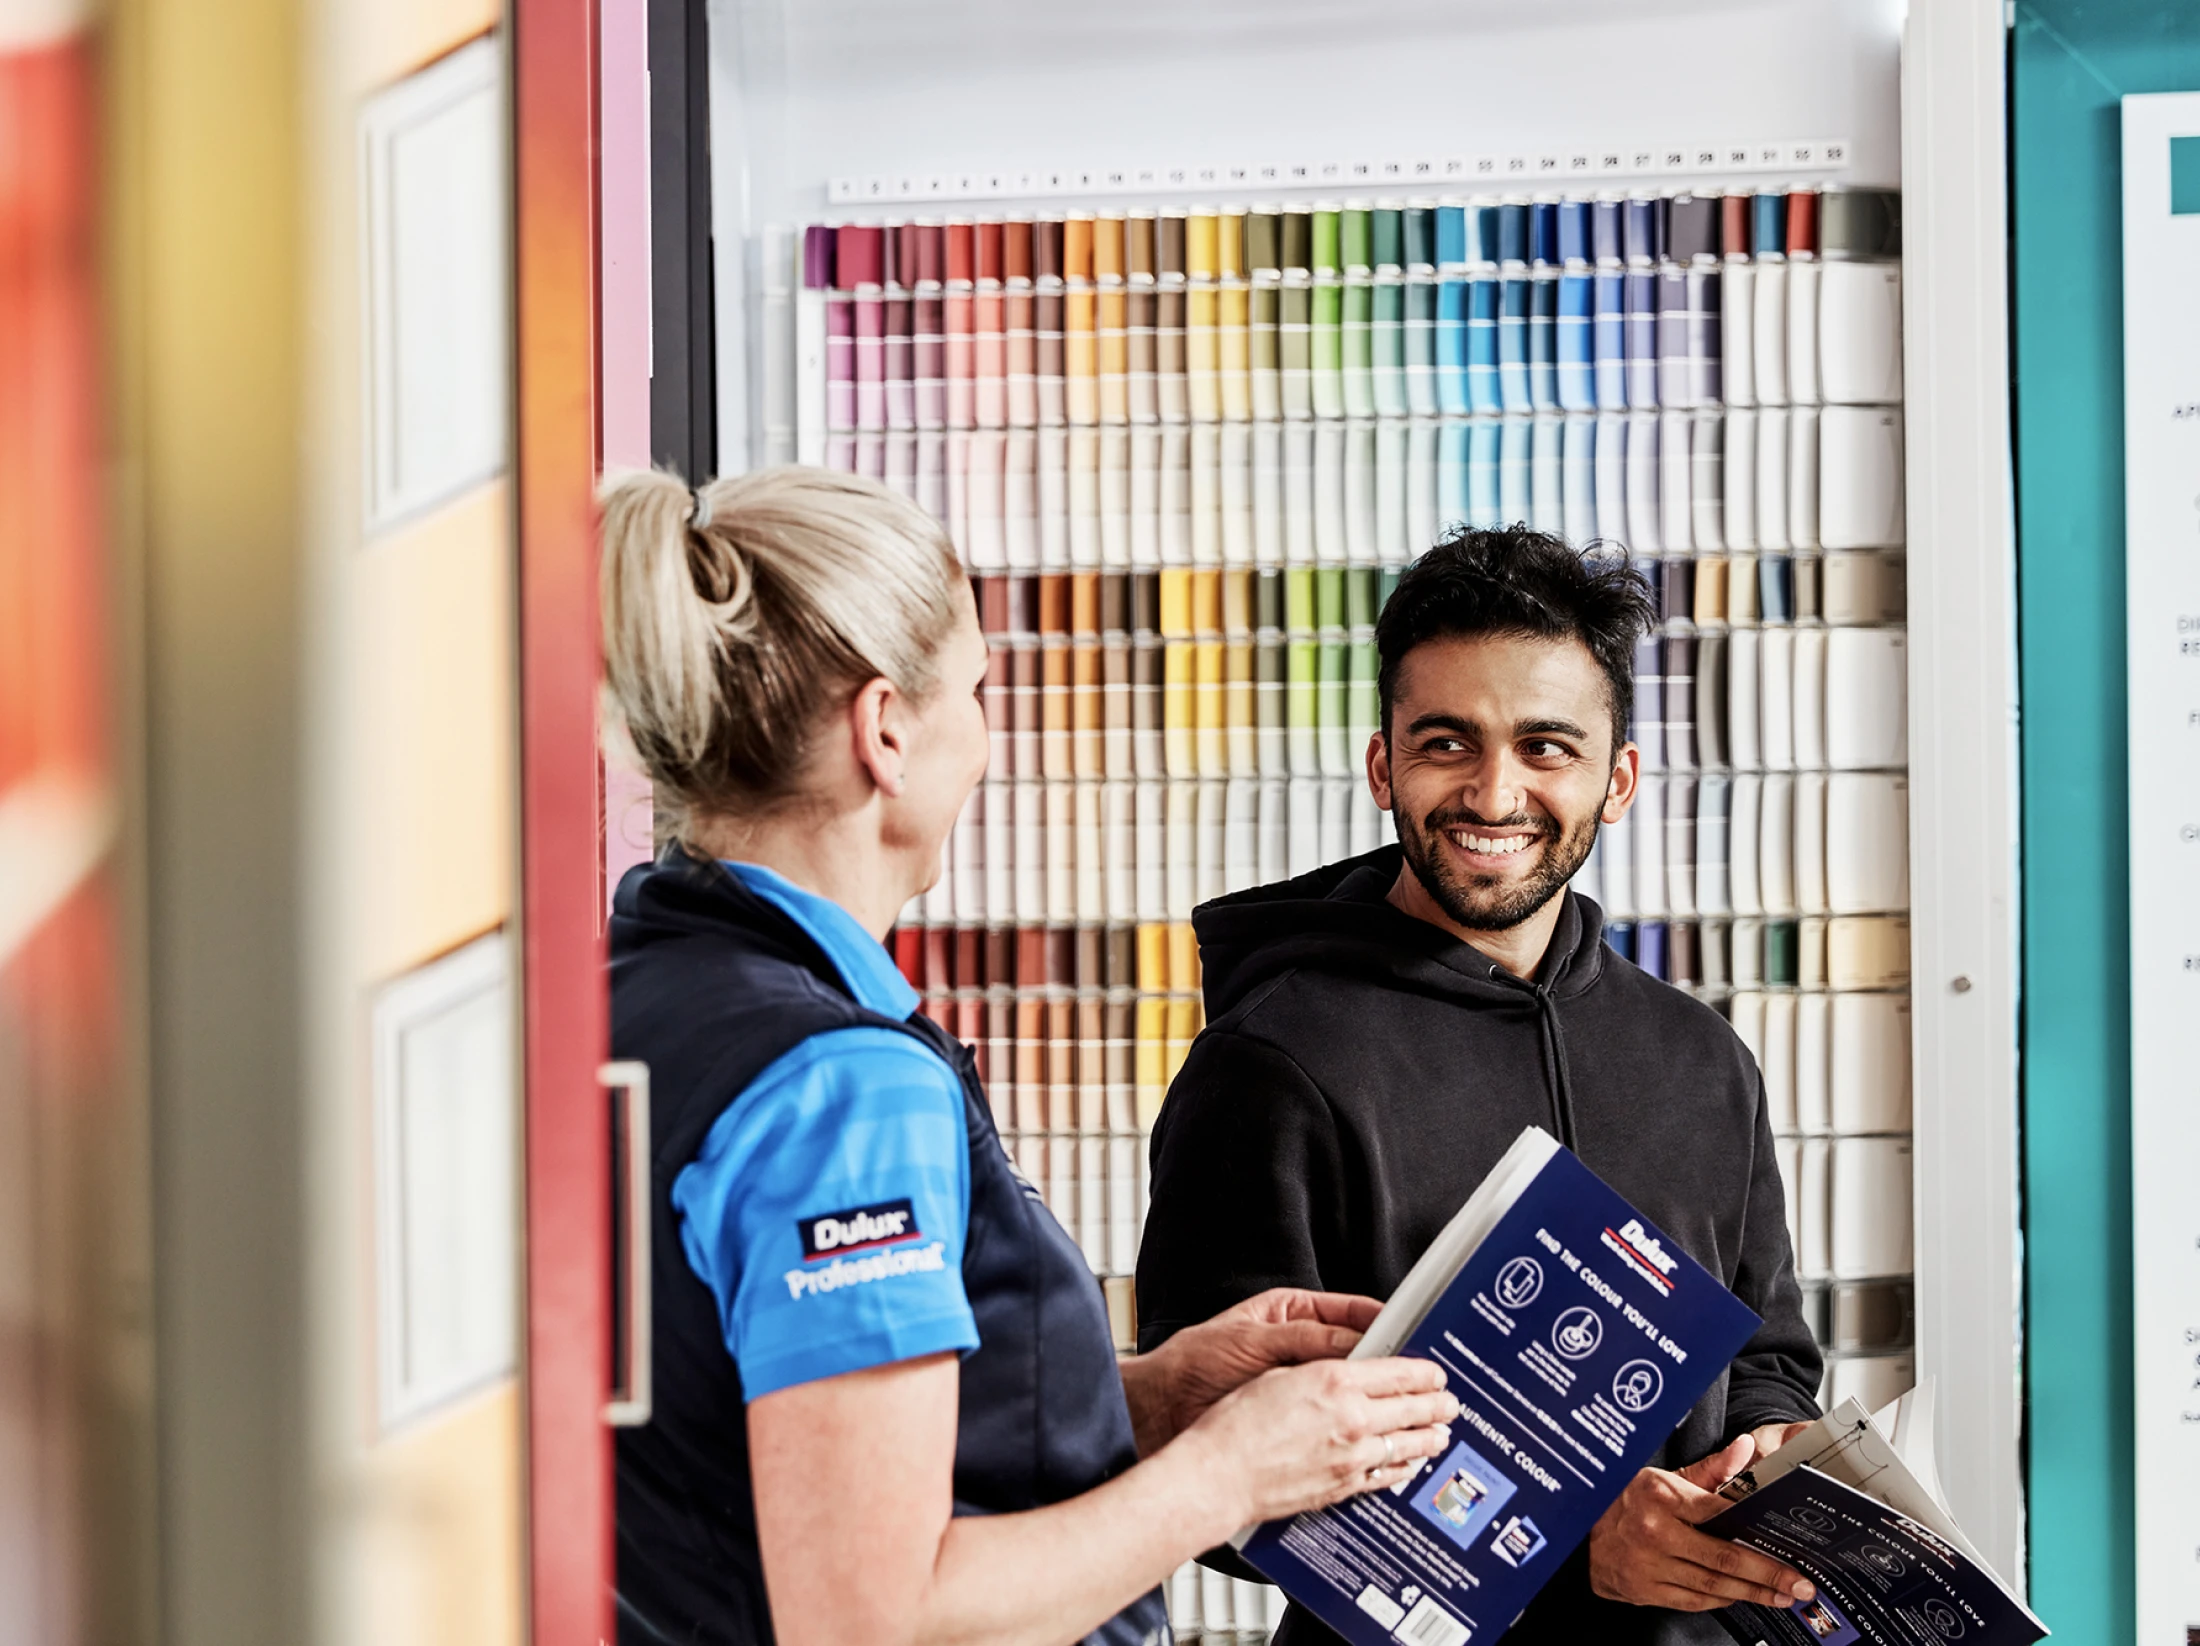 Dulux store staff talking to a painter in front of the colour chip wall.